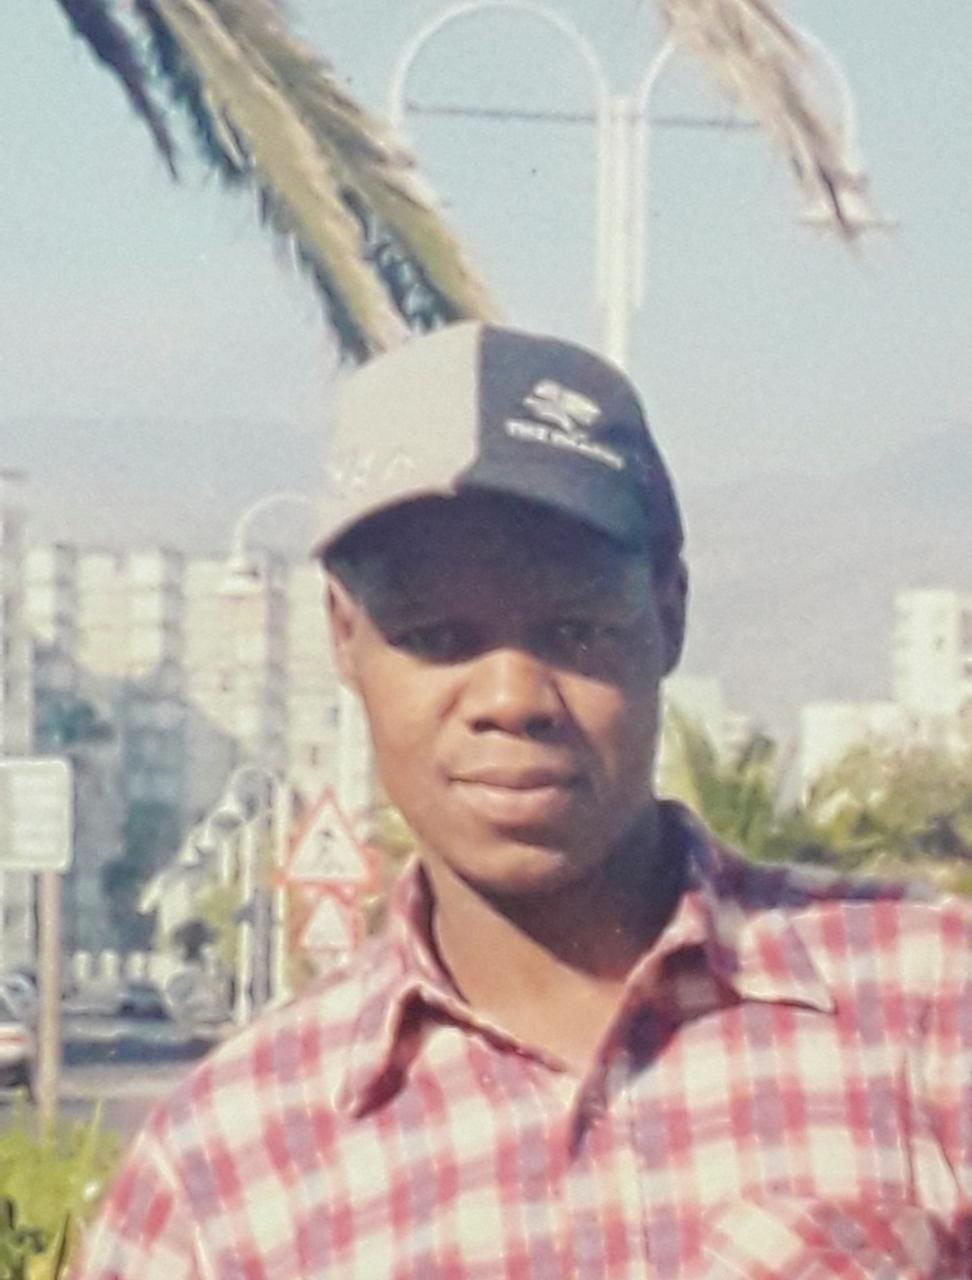 Zeerust police request community assistance in locating a missing man